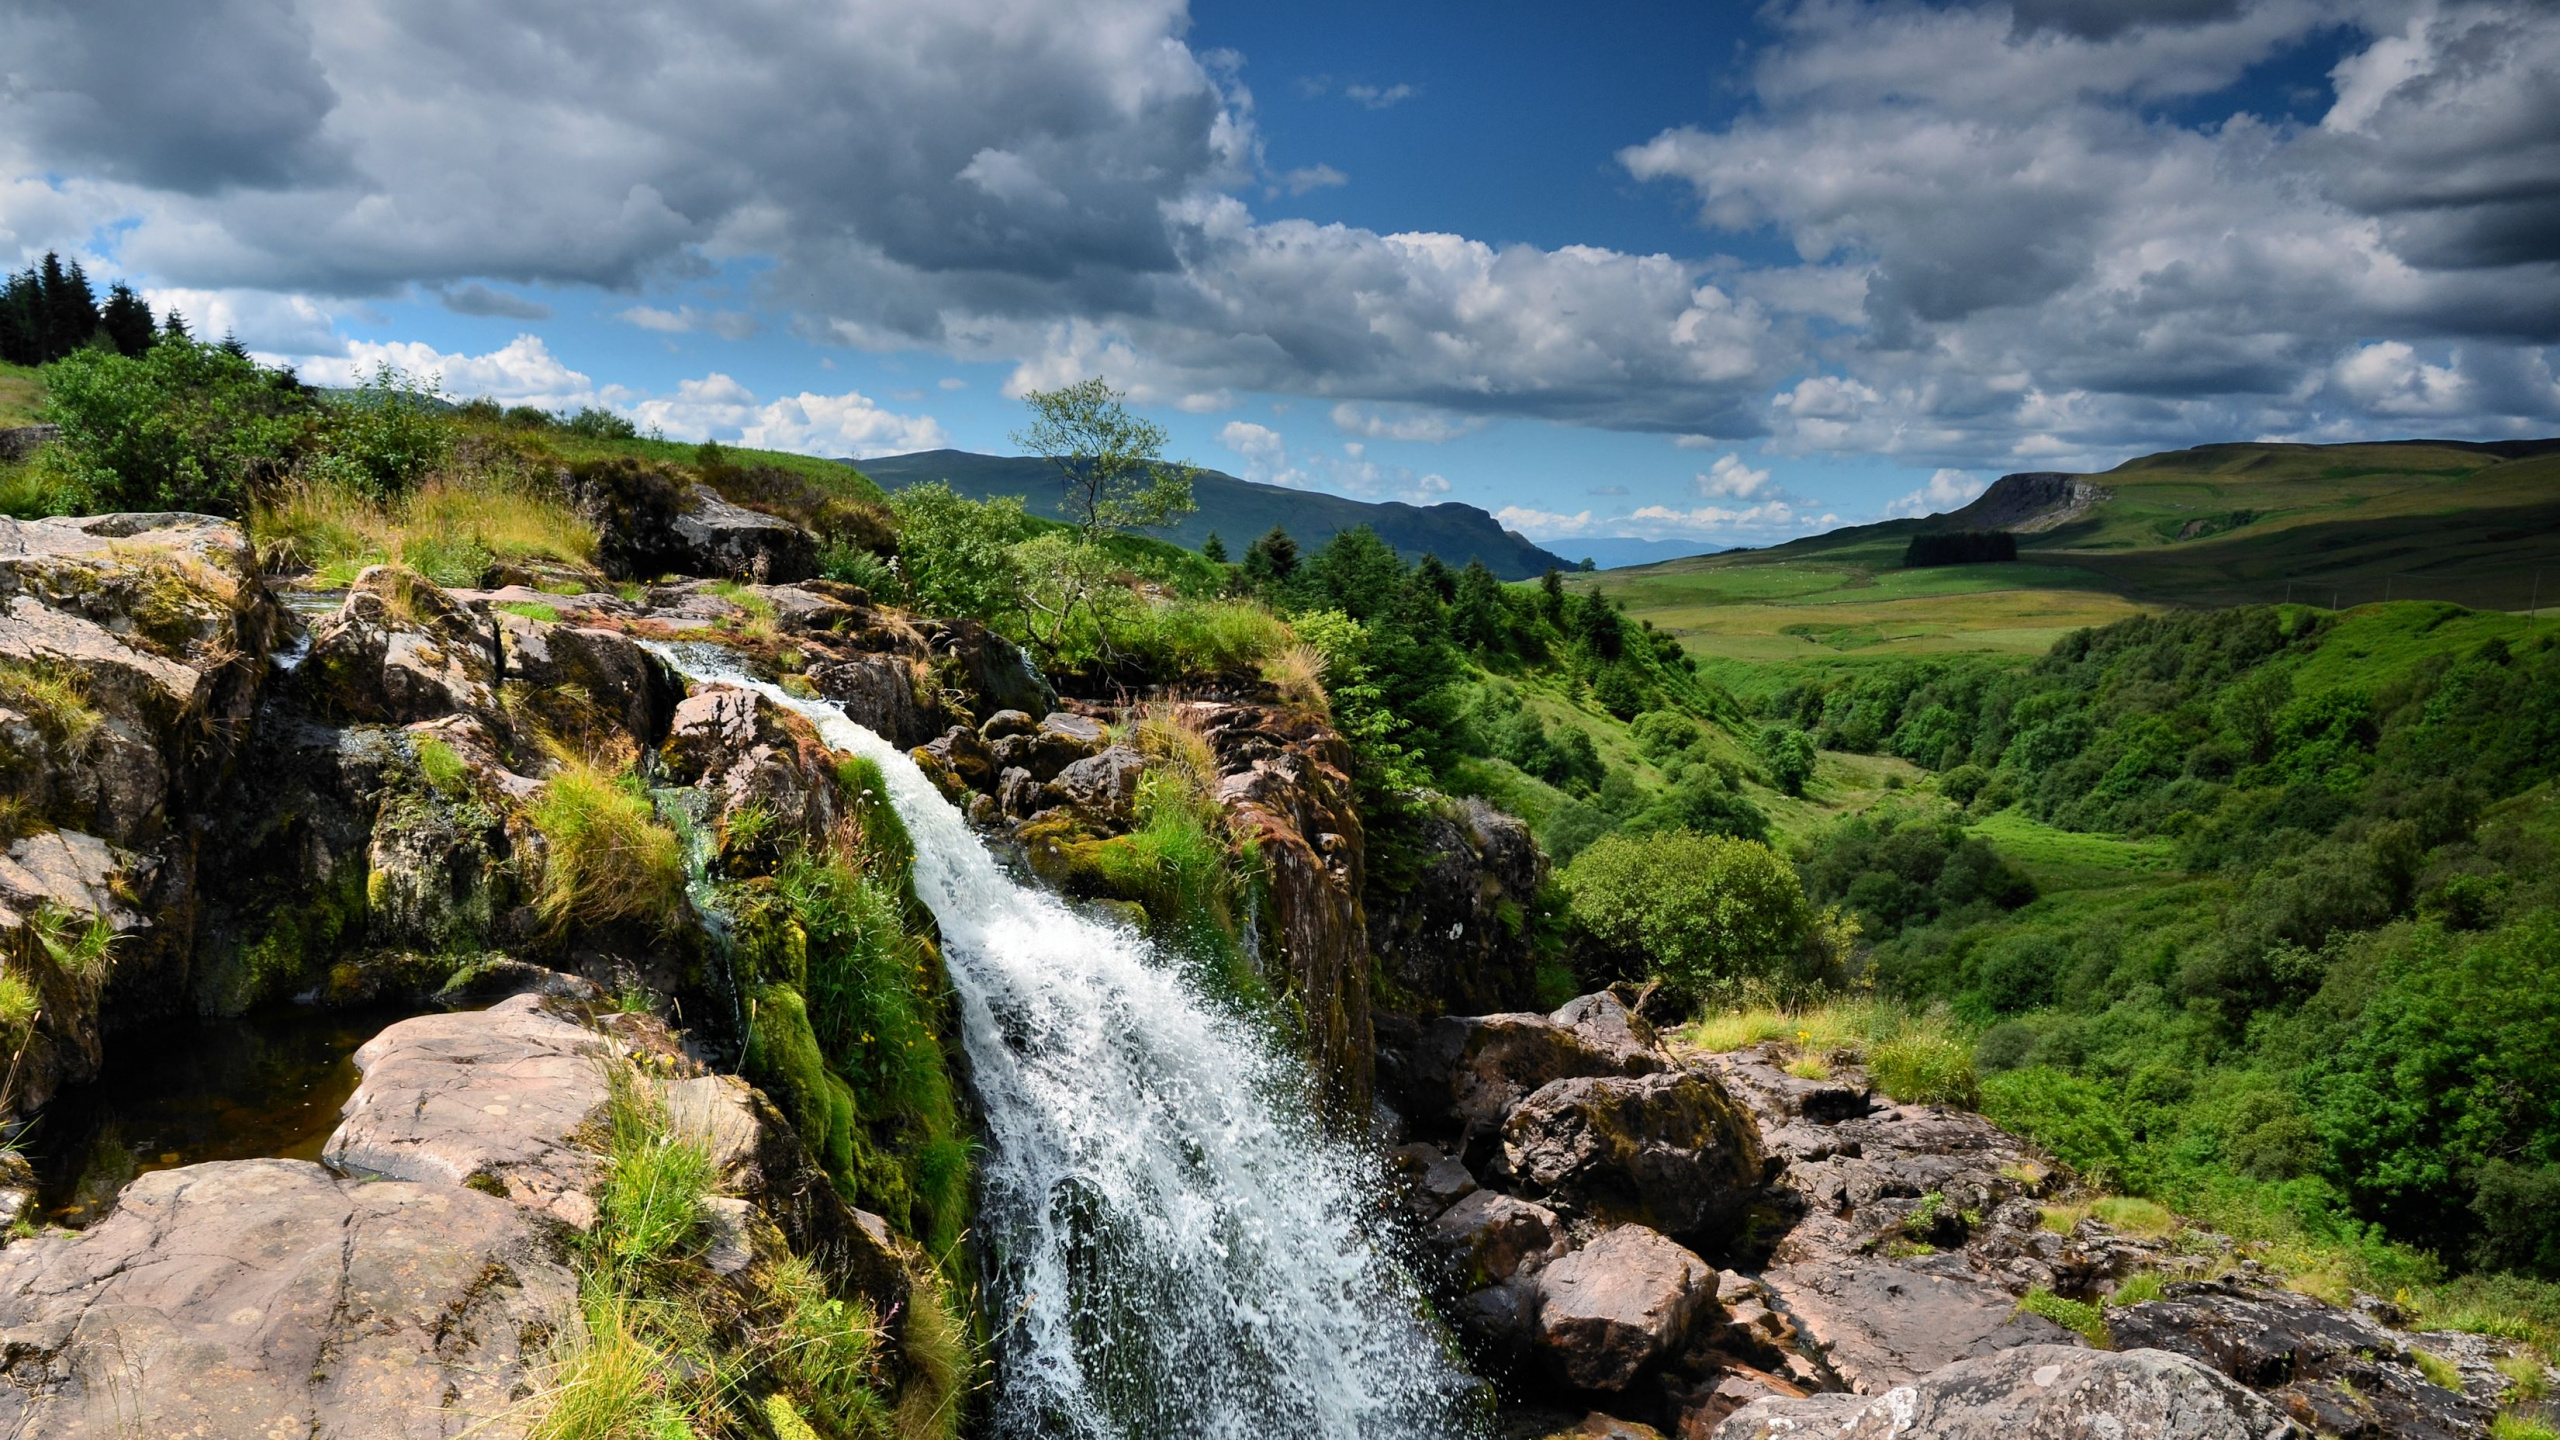 Water Falls on Green Grass Field Under White Clouds and Blue Sky During Daytime. Wallpaper in 2560x1440 Resolution